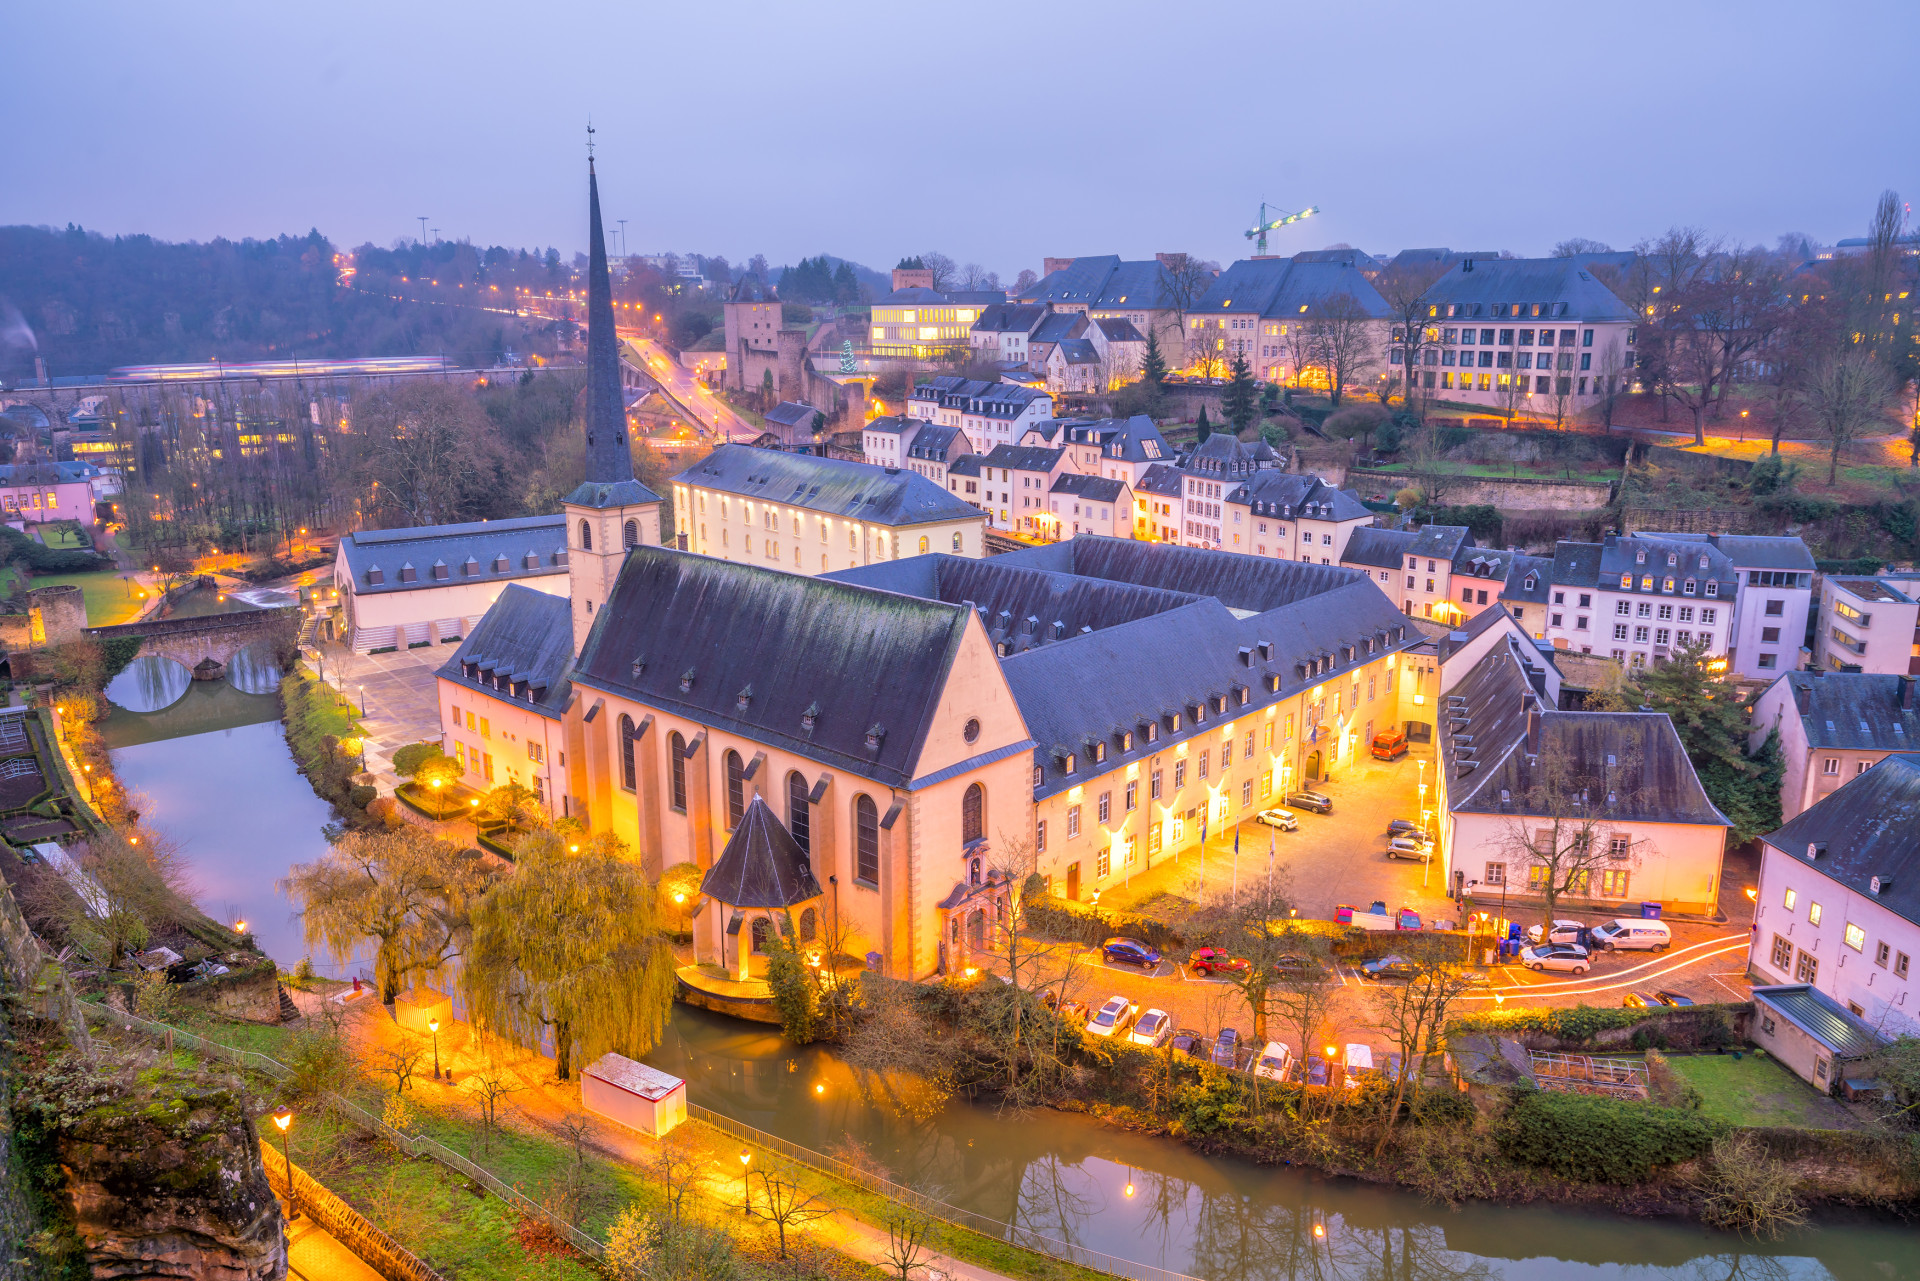 <p>Score: 7.122</p> <p>This European nation might be small in size, but Luxembourg sure has everything its citizens need, and then some!</p><p>You may also like:<a href="https://www.starsinsider.com/n/442728?utm_source=msn.com&utm_medium=display&utm_campaign=referral_description&utm_content=690305en-ca"> The awful truth about Albert Speer, Hitler's architect</a></p>